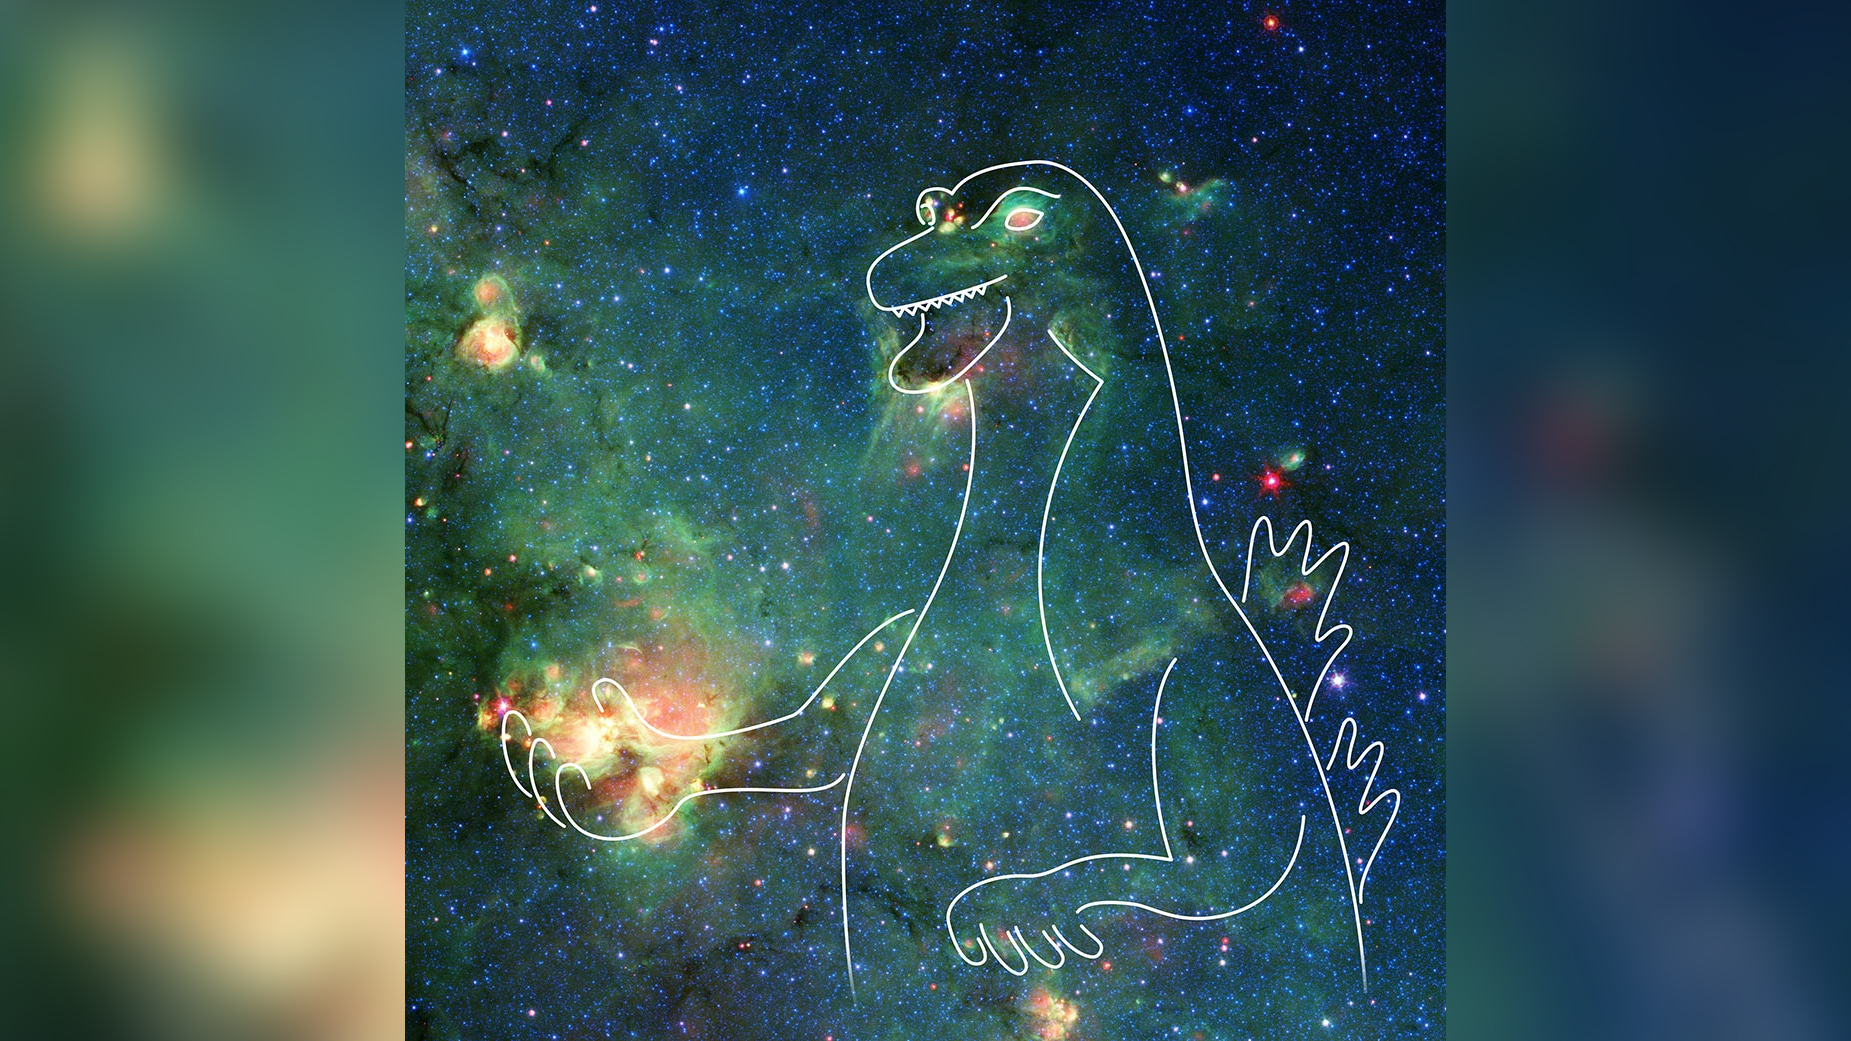 Does this ‘Godzilla’ nebula in actuality explore like a effect lizard?